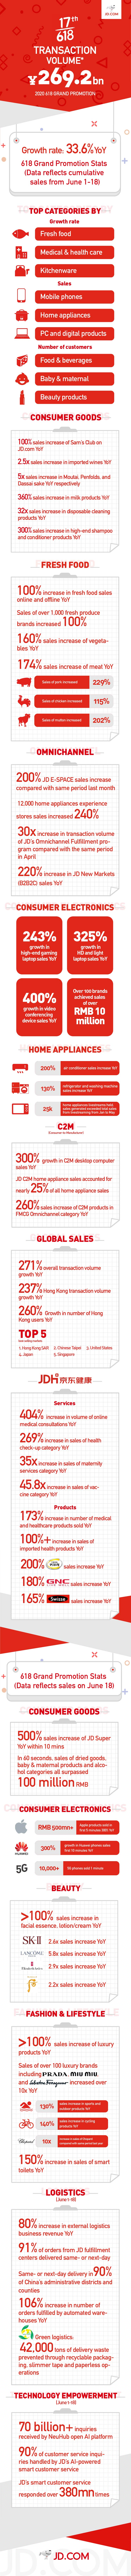 JD.com announced that it had experienced transaction volume on the platform of over 269.2 billion, during the sales period, up more than 33.6% year on year.